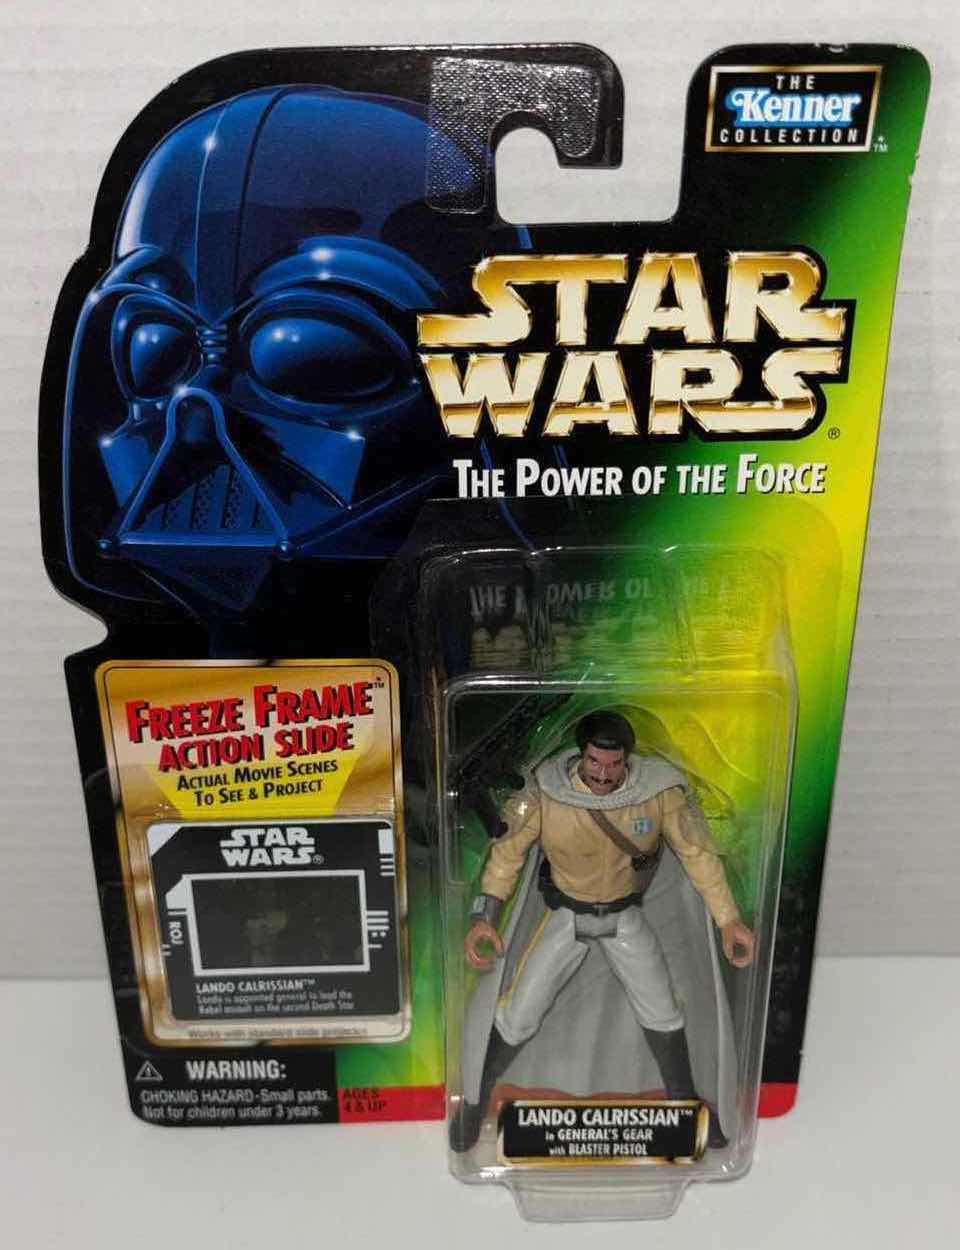 Photo 1 of NEW KENNER STAR WARS THE POWER OF THE FORCE ACTION FIGURE, LANDO CALRISSIAN IN GENERALS GEAR W BLASTER PISTOL & FREEZE FRAME ACTION SLIDE